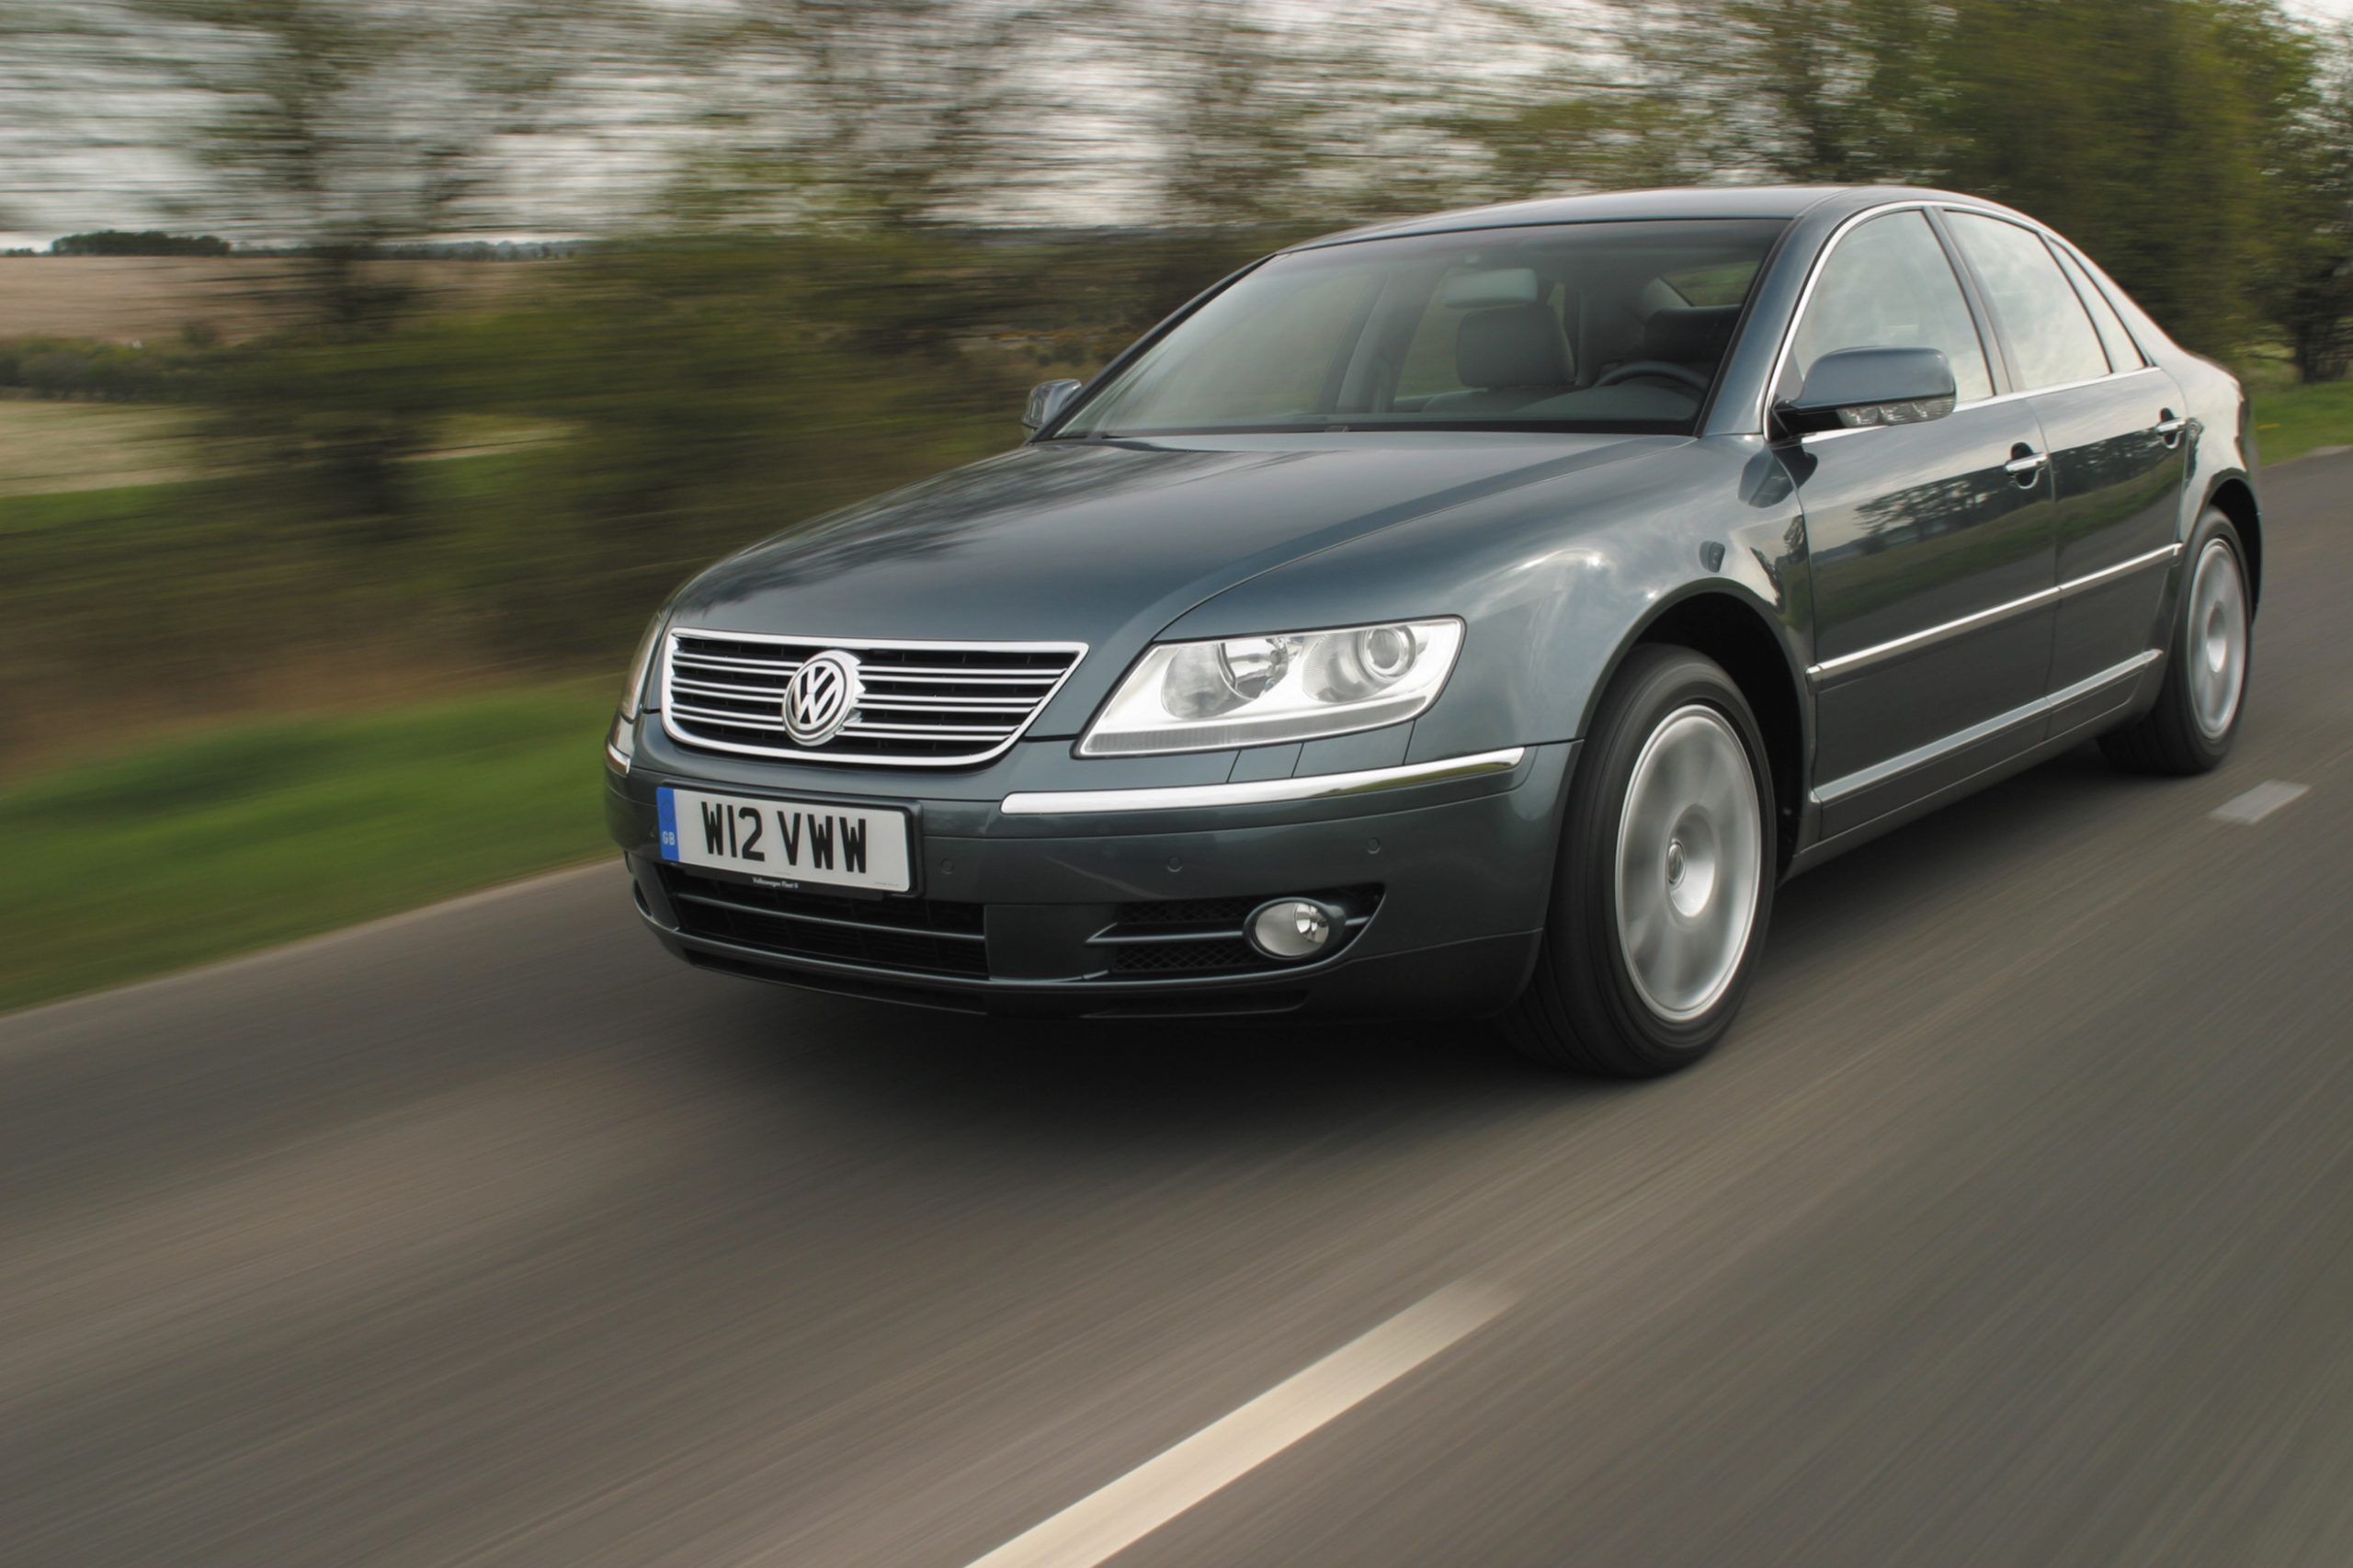 Volkswagen’s Phaeton got everything wrong – and that’s why we like it